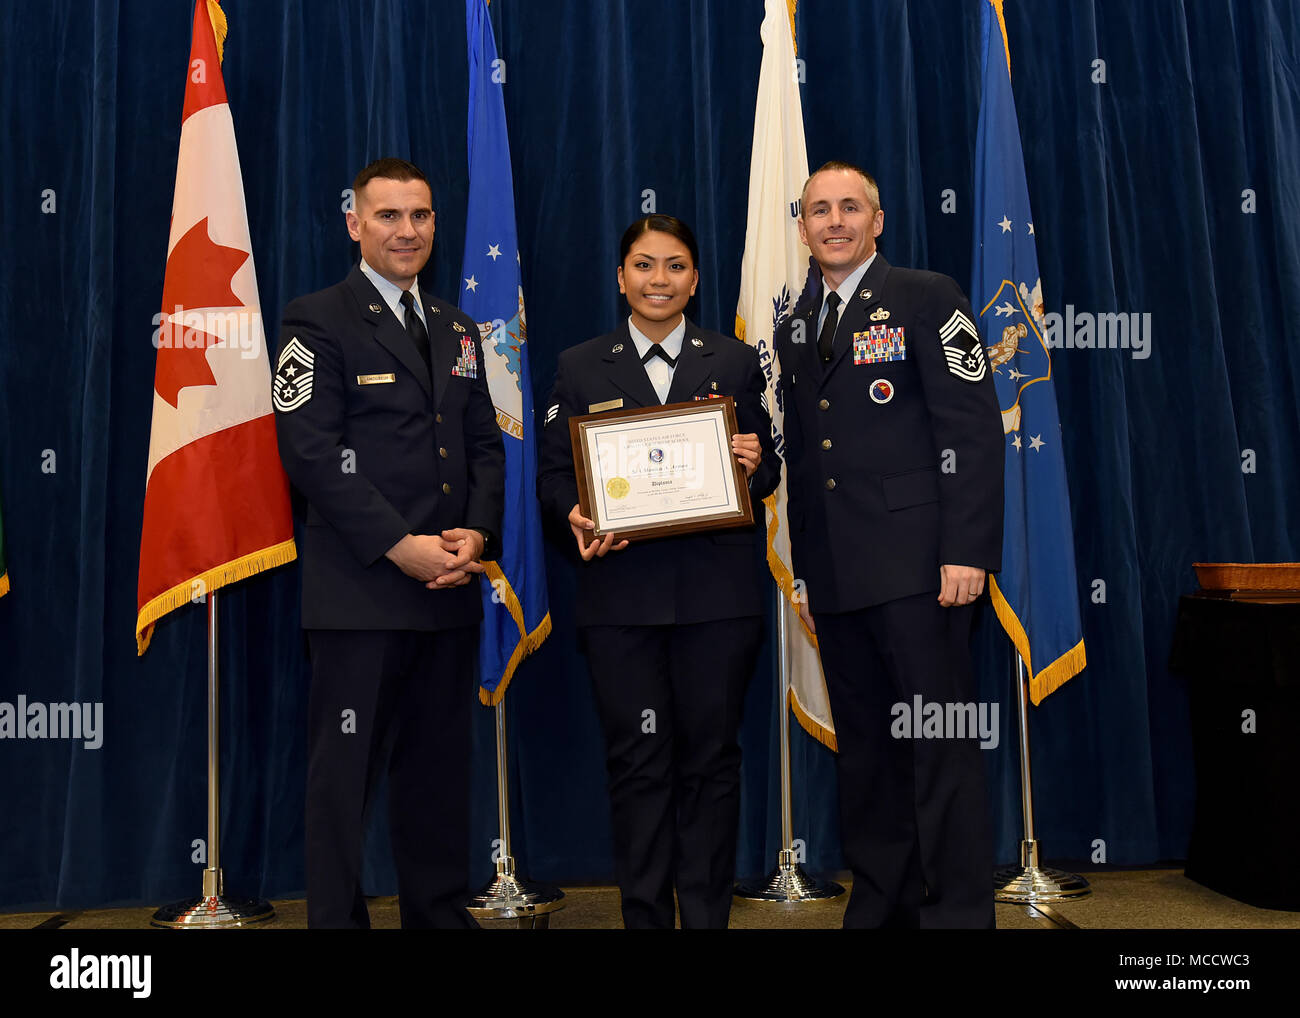 Senior Airman Monica Armea from Fort Peoria Air National Guard Base, Ill., takes the Distinguished Graduate Award in Airman Leadership School 18-4 at the Chief Master Sgt. Paul H. Lankford Enlisted Professional Military Education Center on McGhee Tyson Air National Guard Base in East Tennessee, Feb. 8, 2018, during the graduation ceremony. (U.S. Air National Guard photo/Master Sgt. Mike R. Smith) Stock Photo